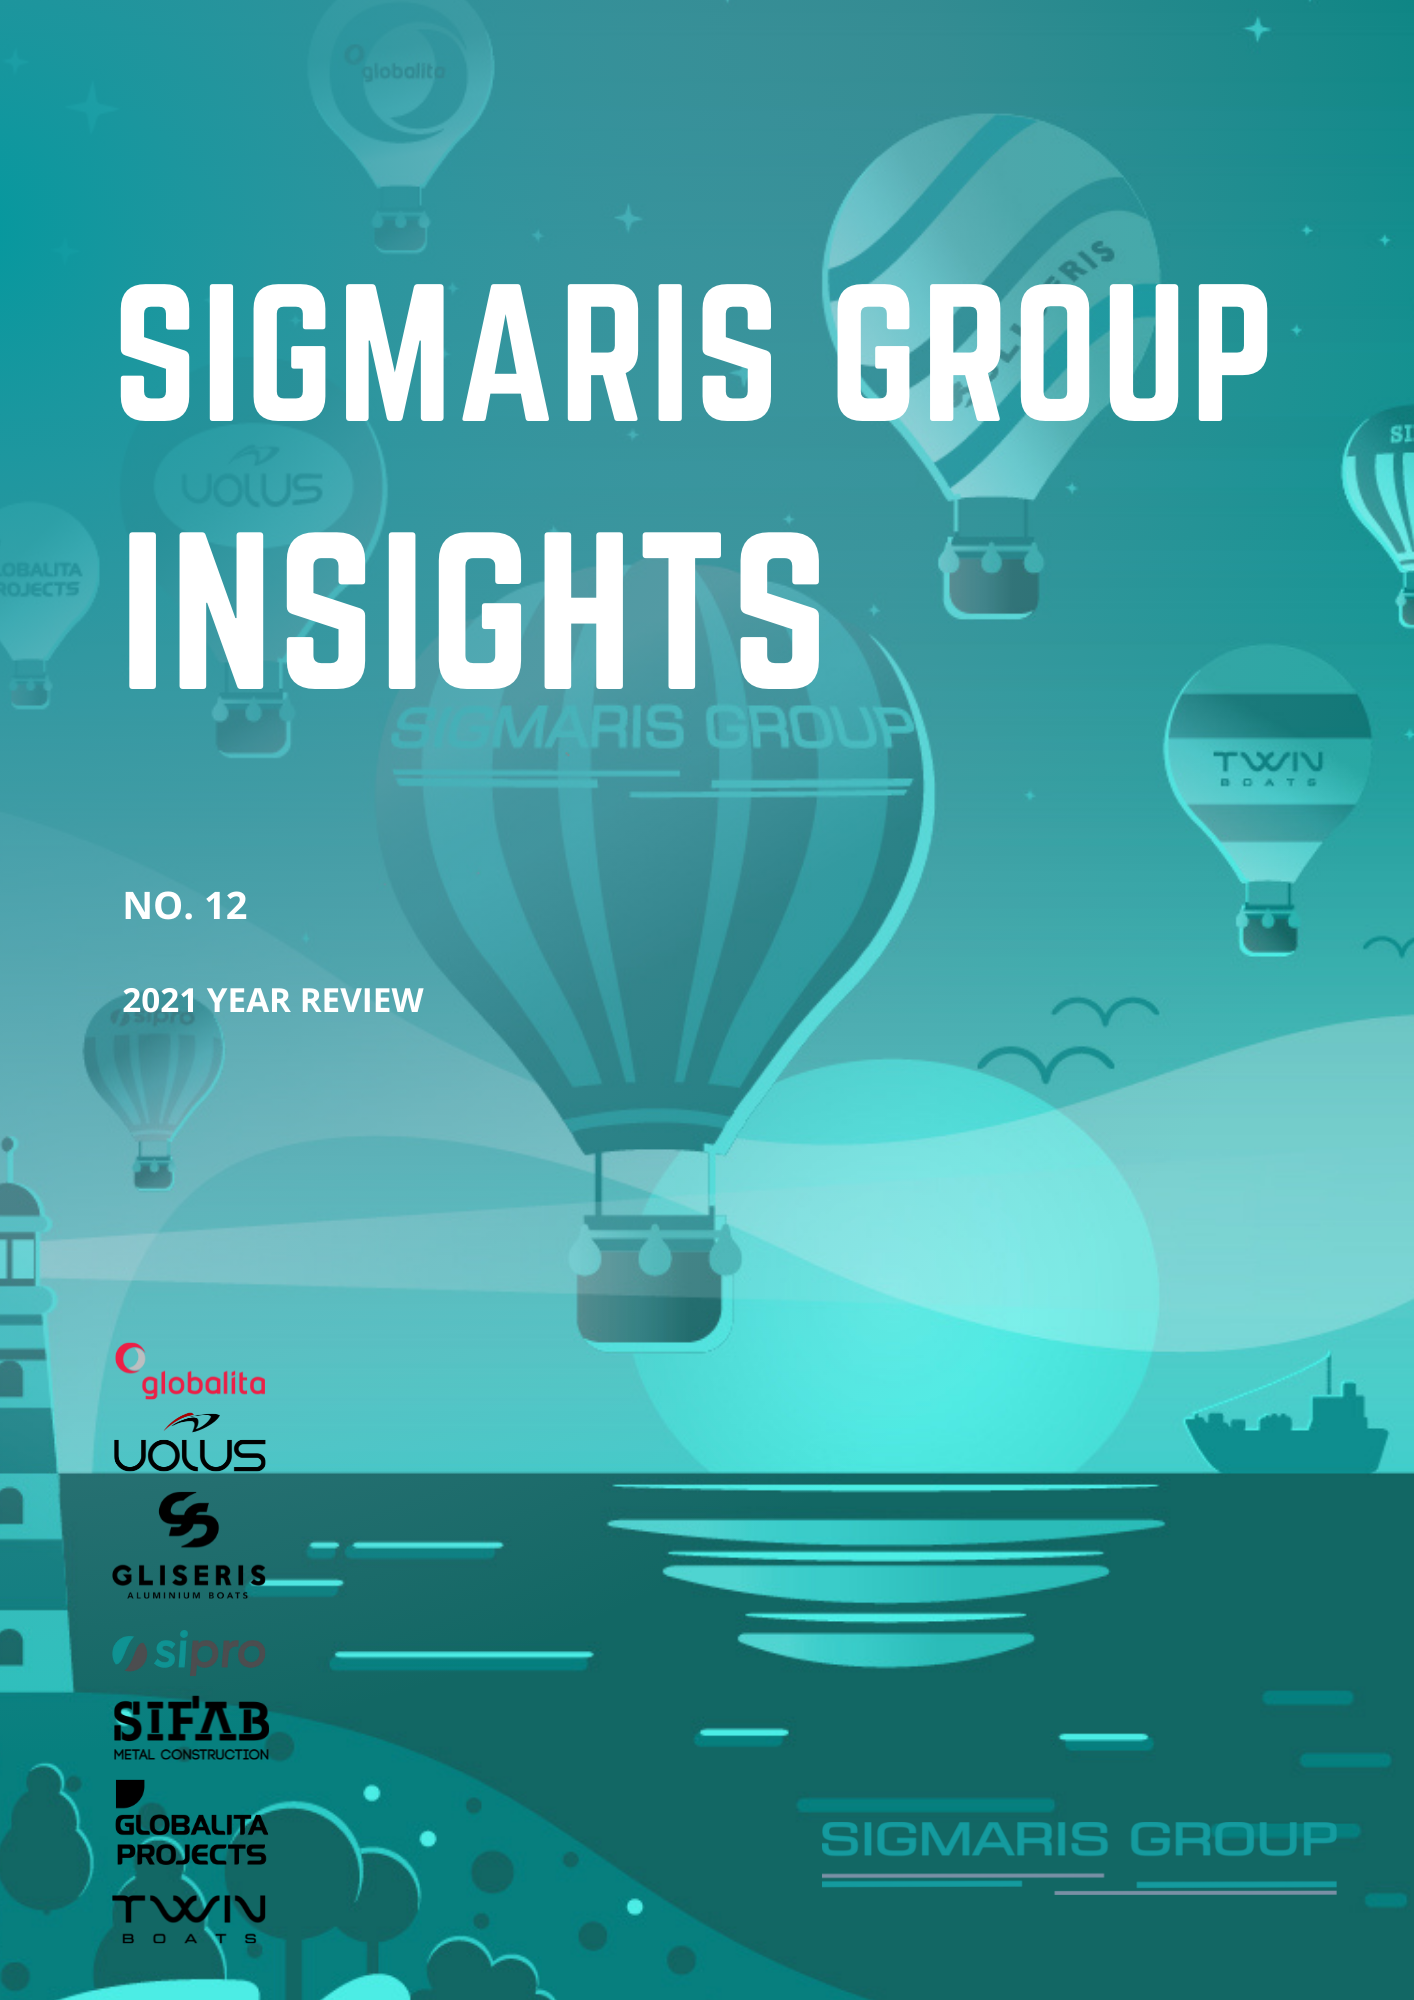 SIGMARIS GROUP INSIGHTS YEAR REVIEW EN